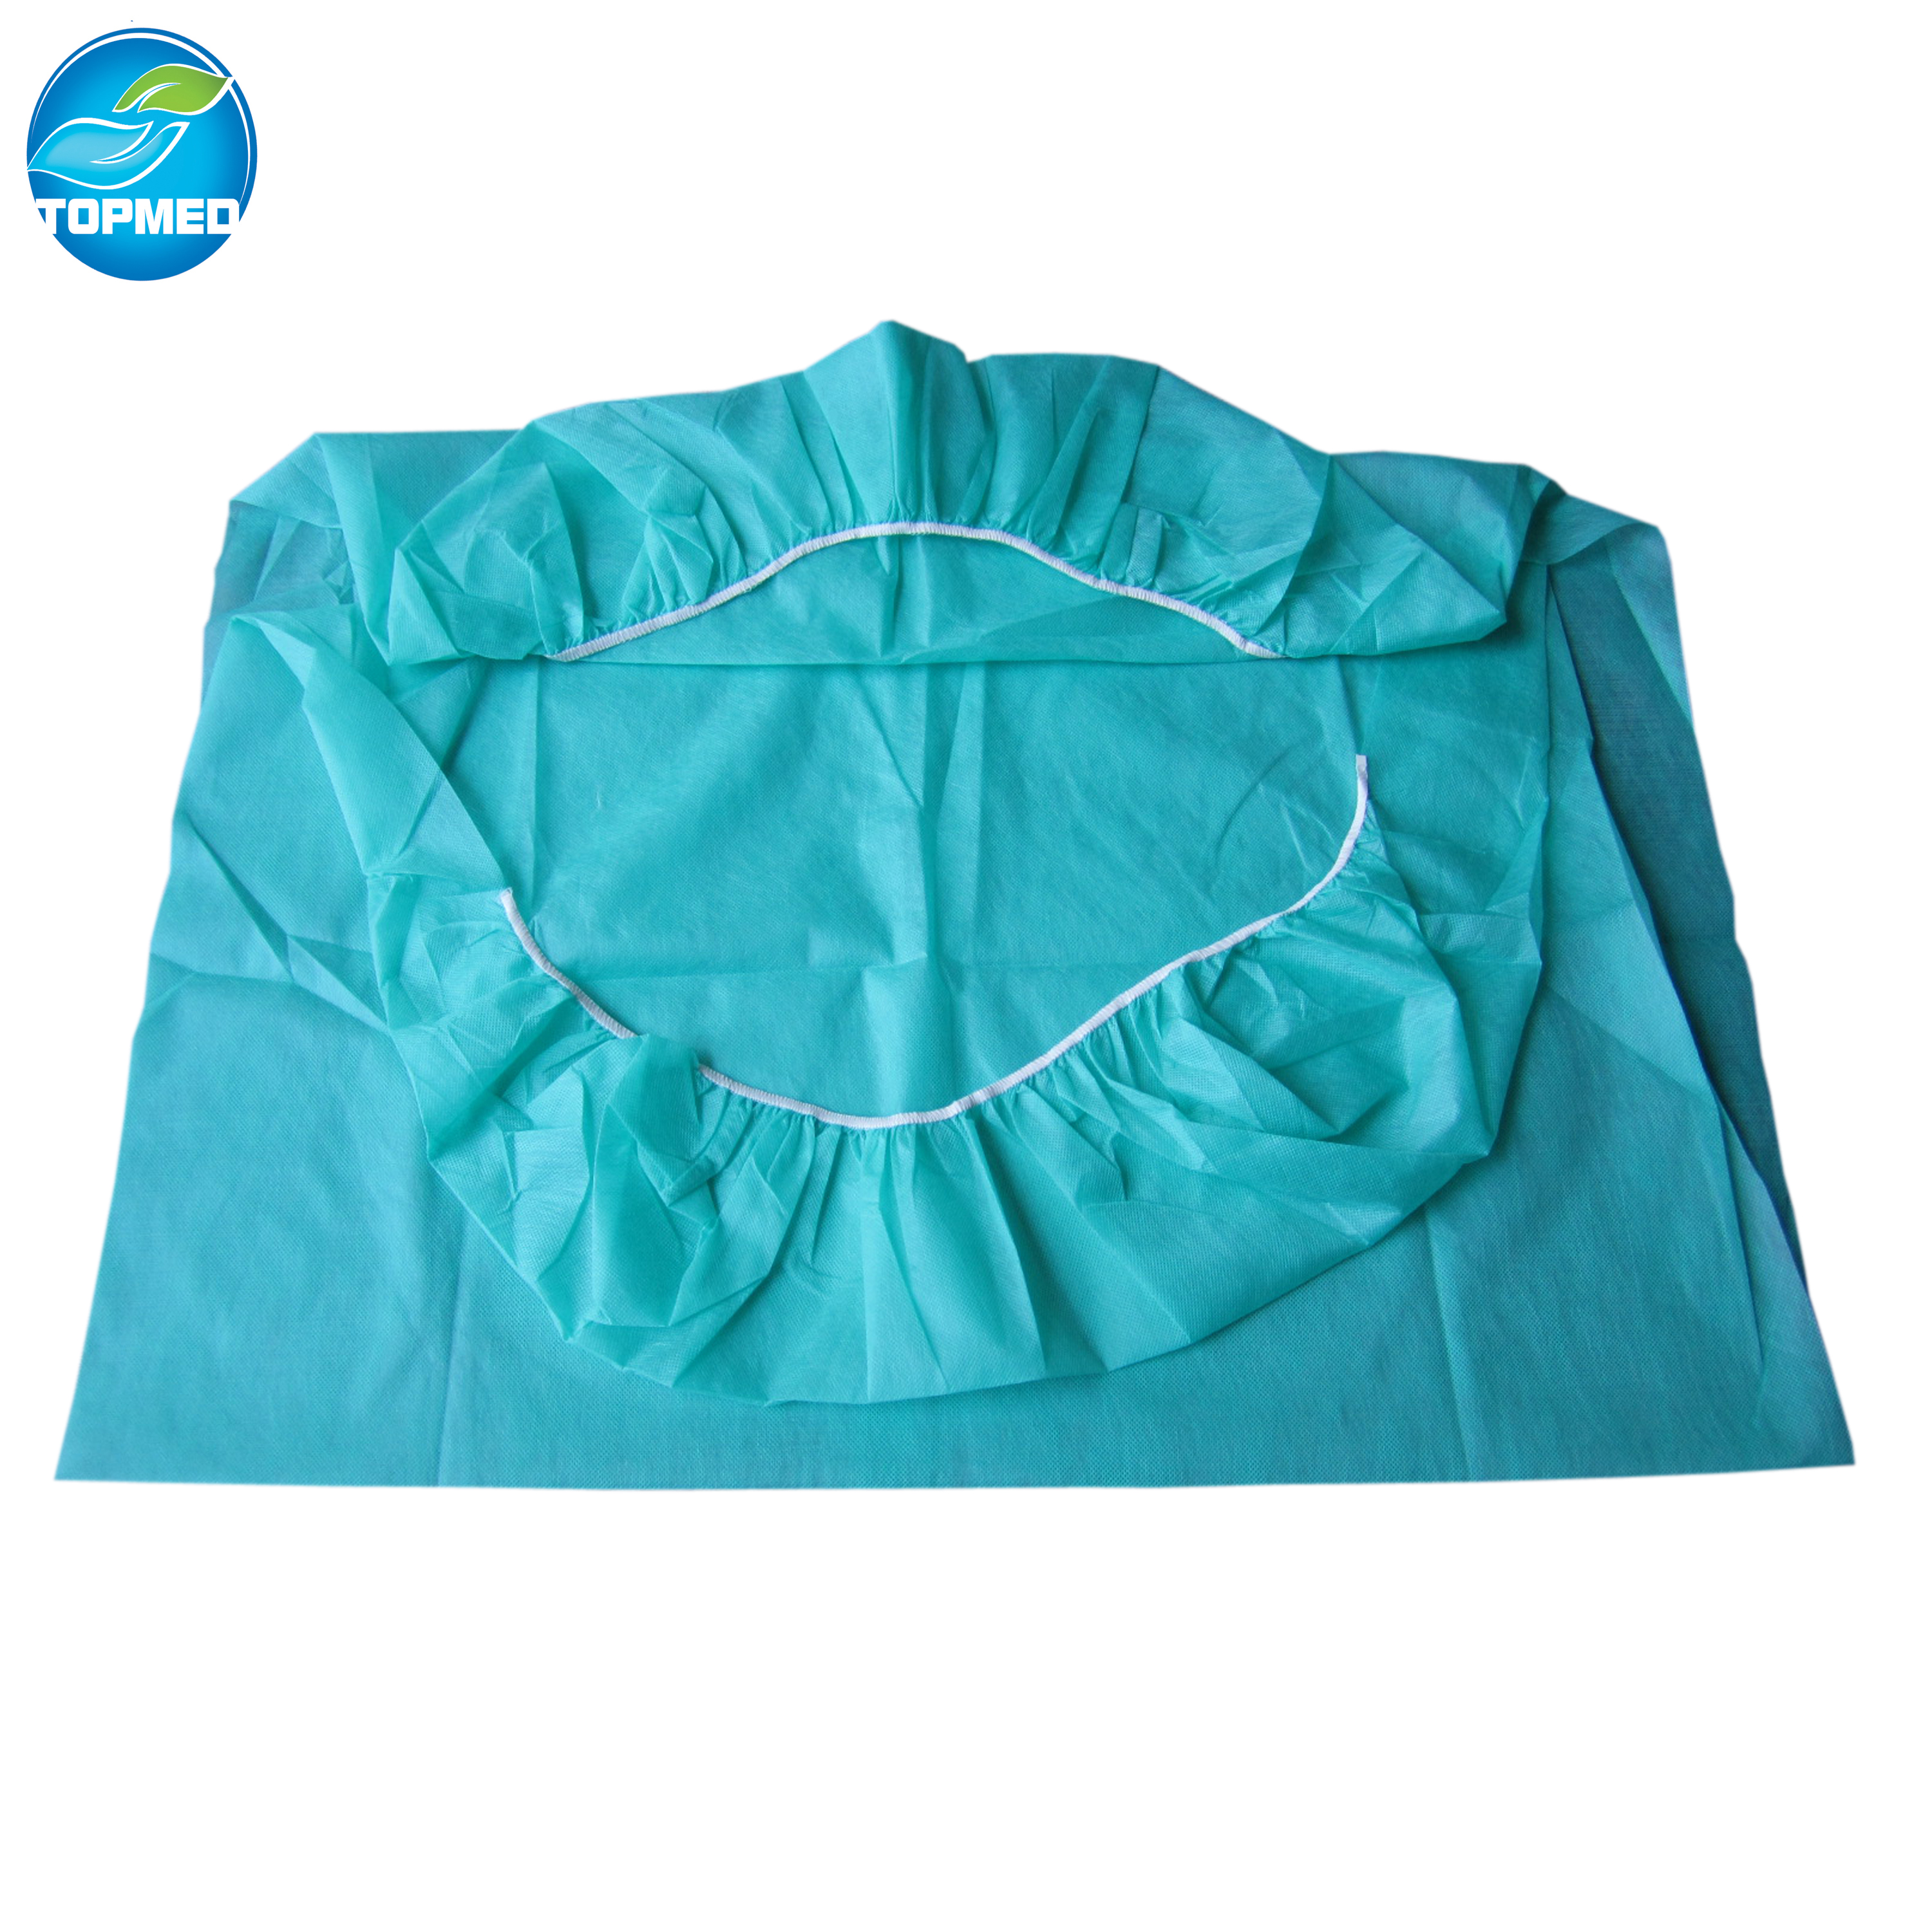 Disposable Nonwoven adjust bed sheet cover with elastics